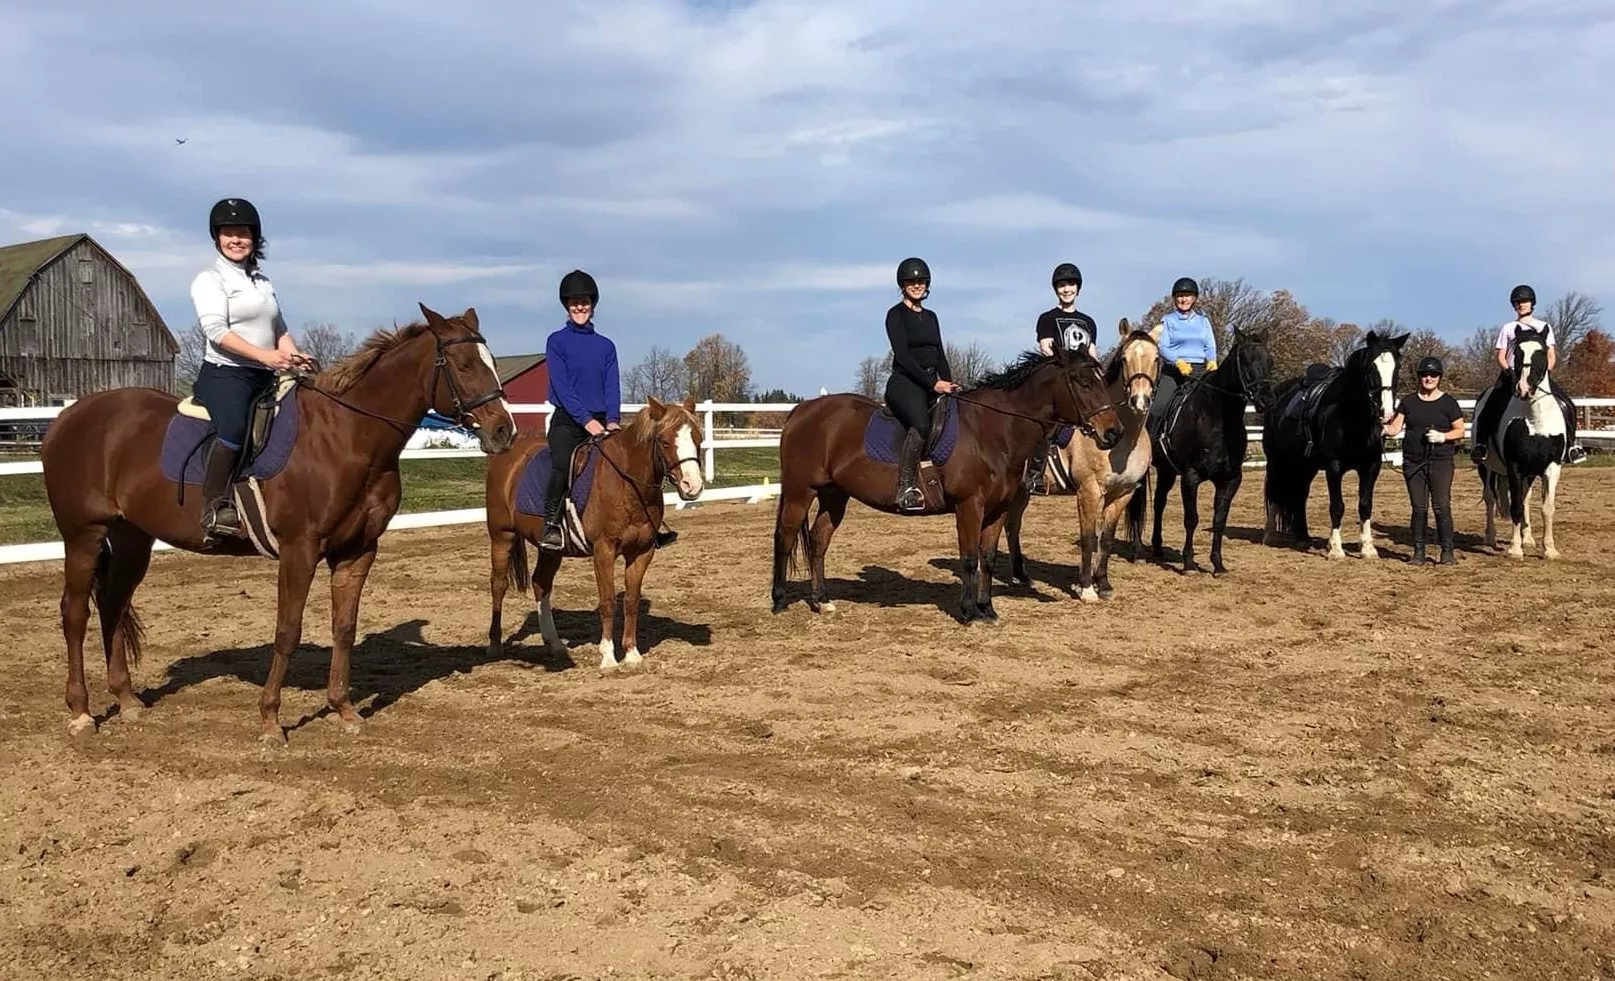 Some mounted staff members in the outdoor sand ring.